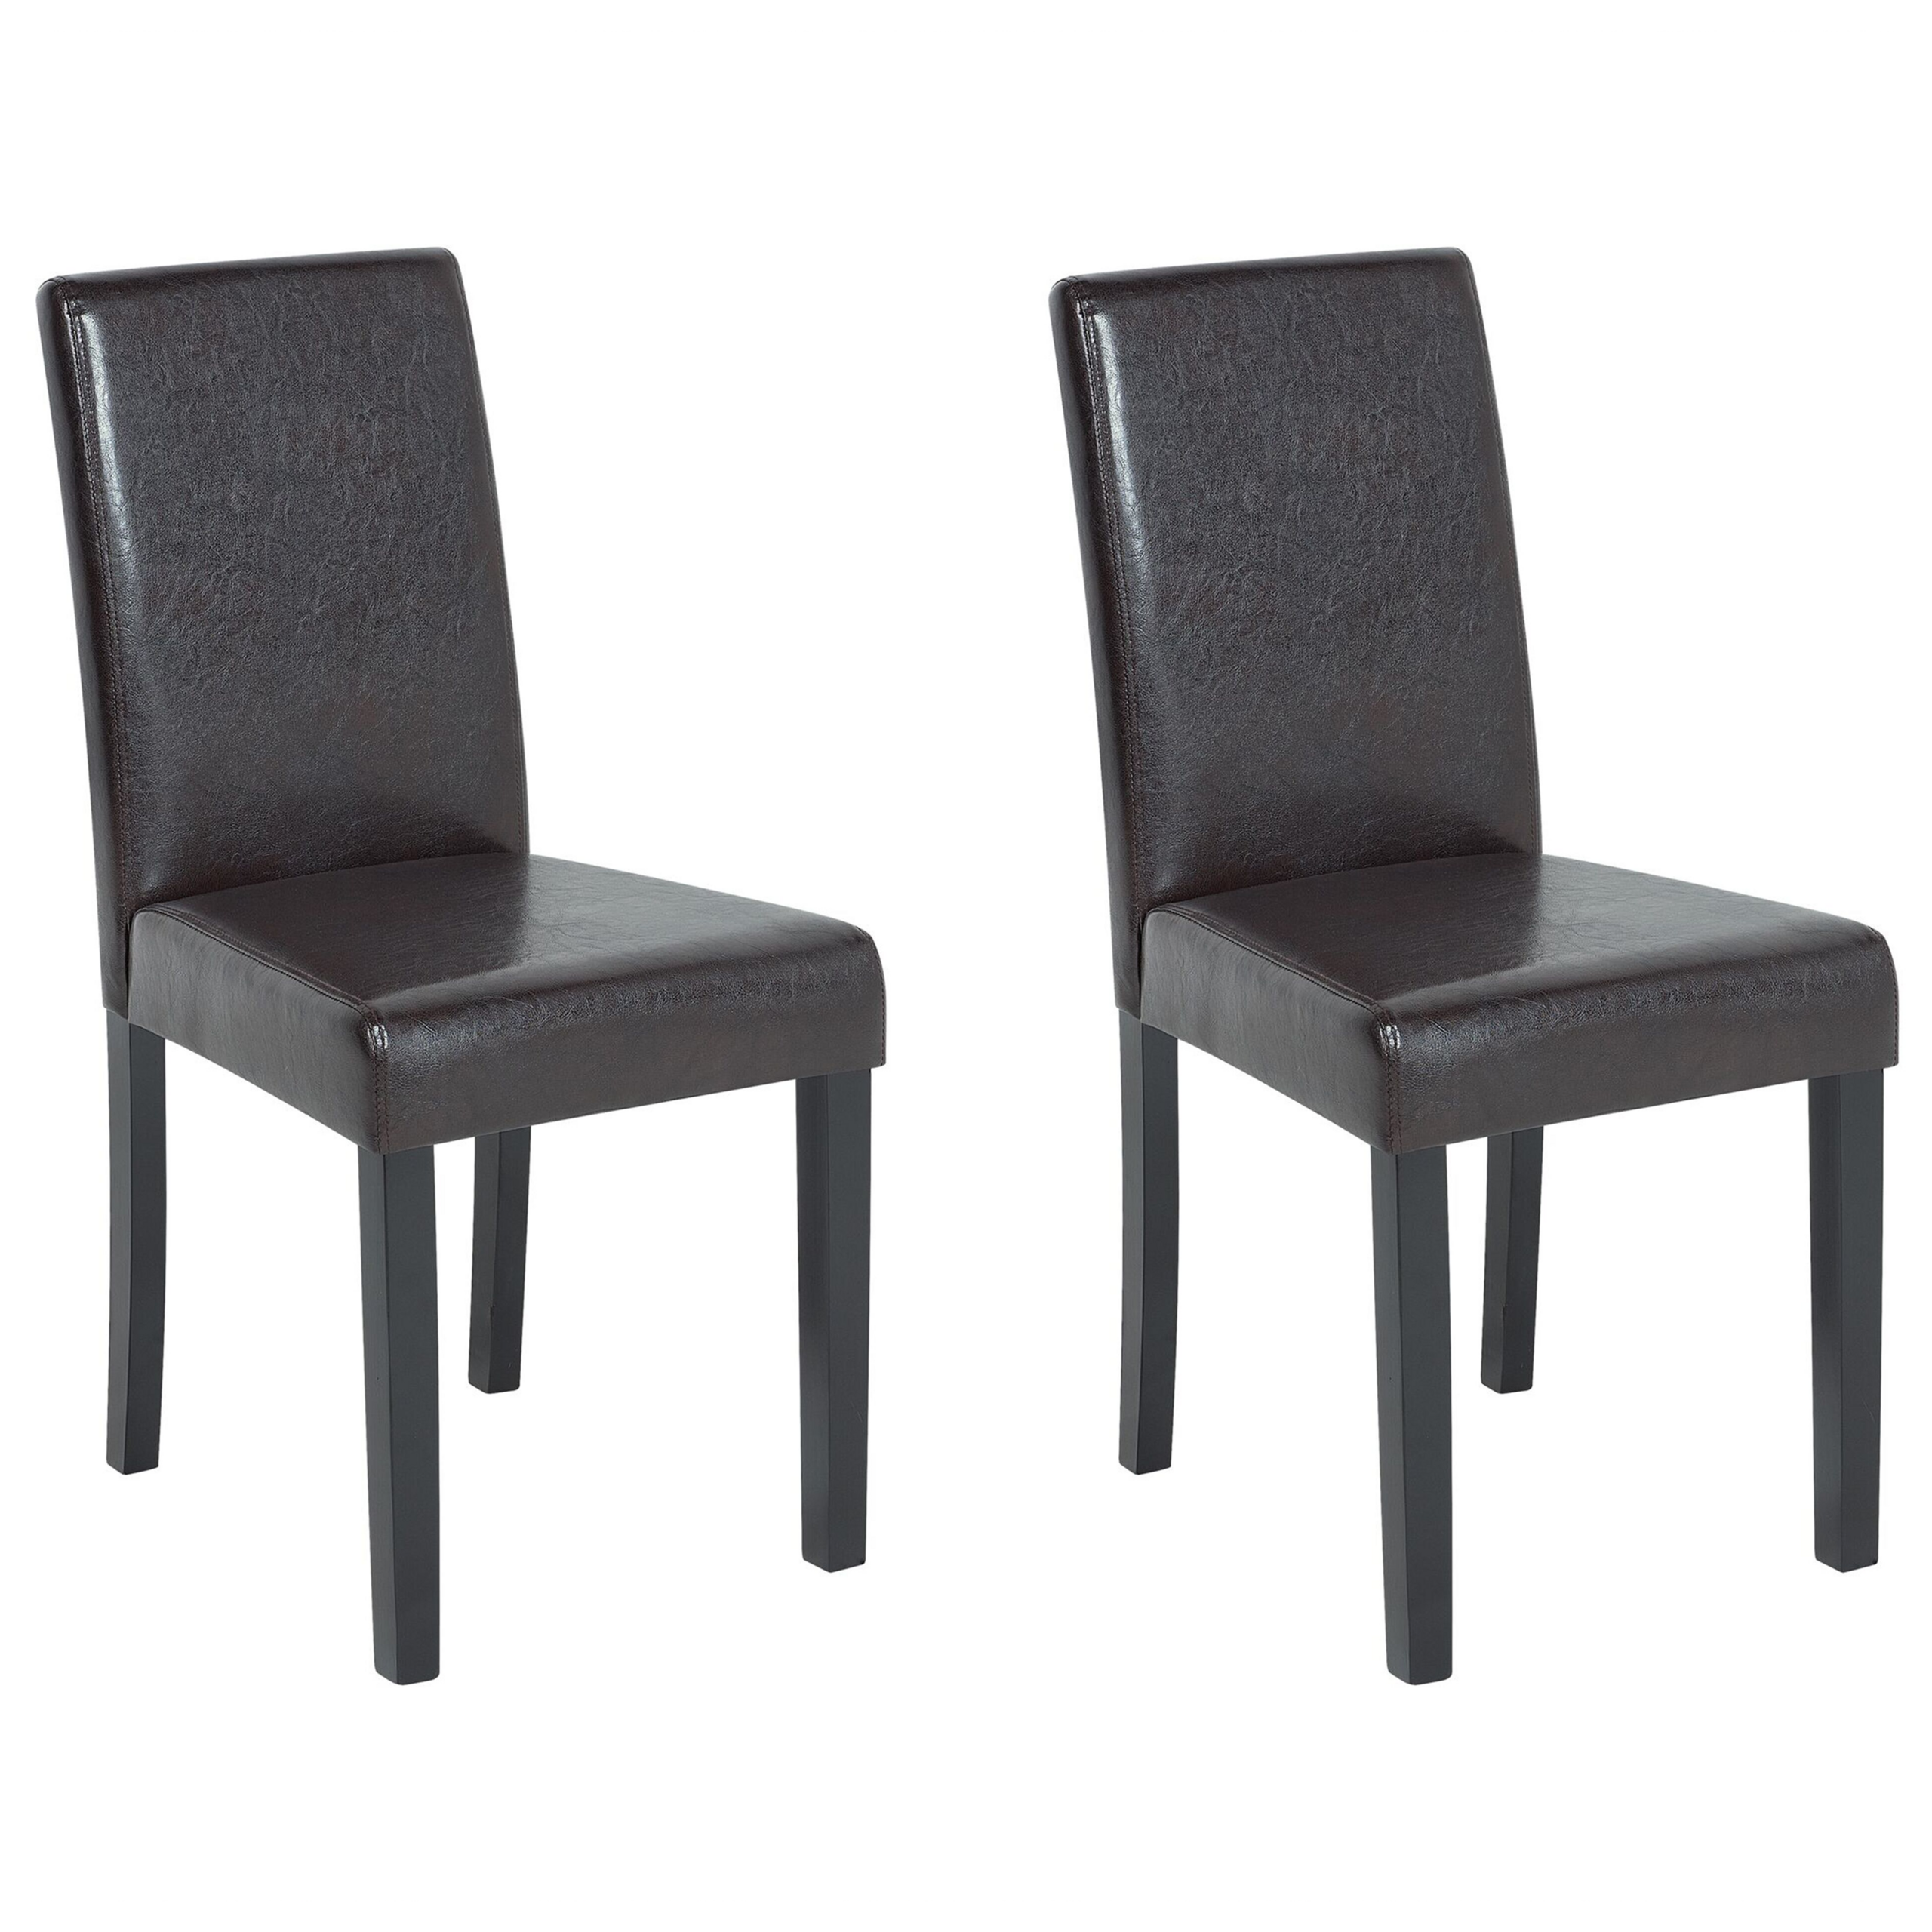 Beliani Set of 2 Dining Chairs Brown Faux Leather Wooden Legs Traditional